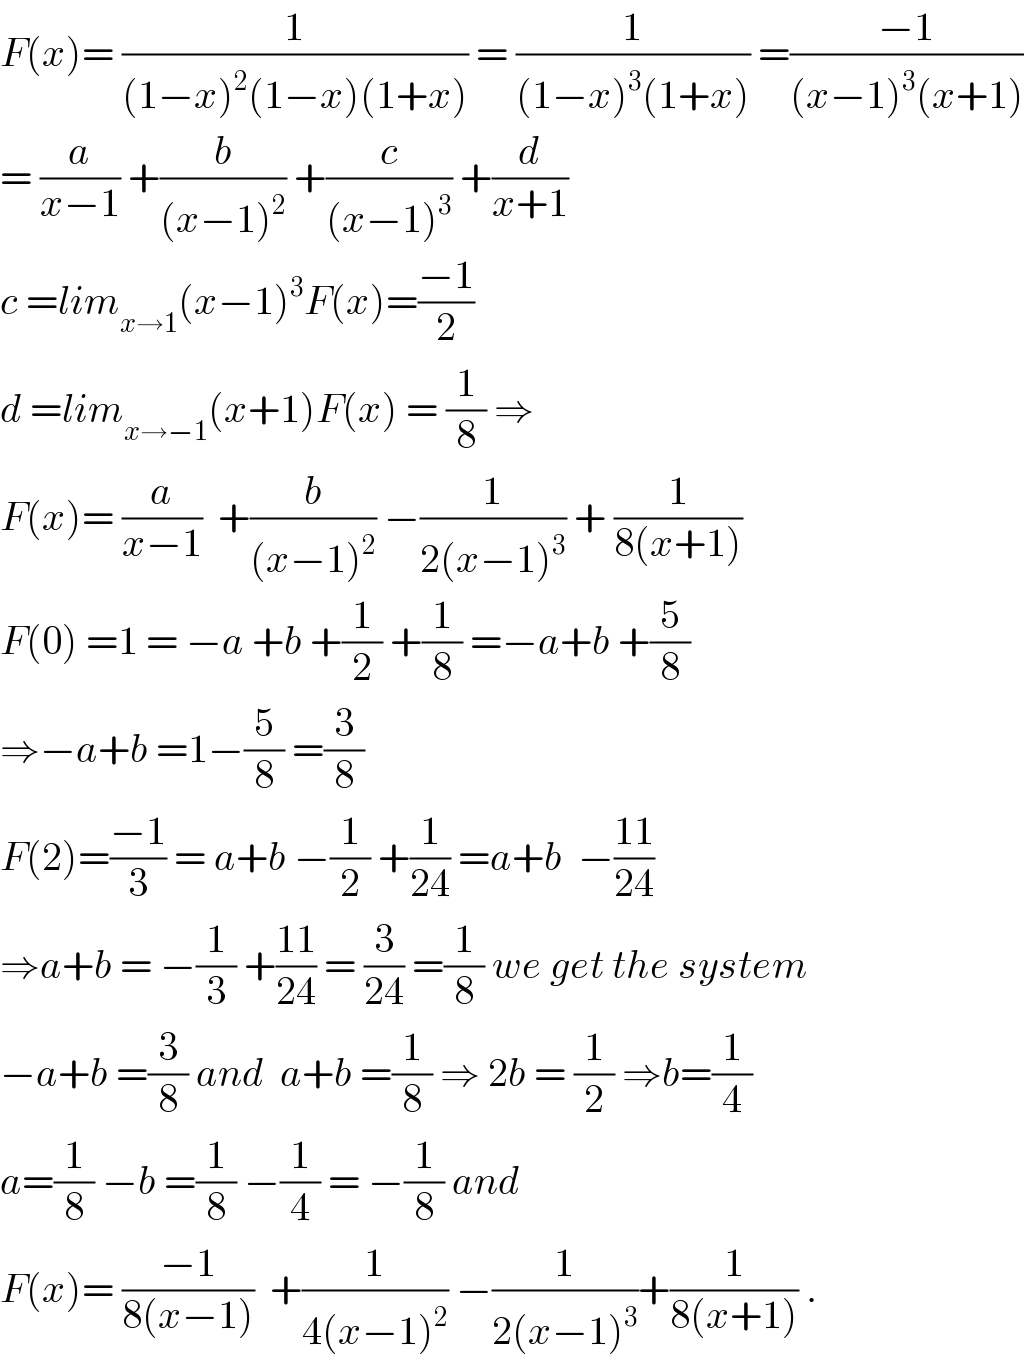 F(x)= (1/((1−x)^2 (1−x)(1+x))) = (1/((1−x)^3 (1+x))) =((−1)/((x−1)^3 (x+1)))  = (a/(x−1)) +(b/((x−1)^2 )) +(c/((x−1)^3 )) +(d/(x+1))  c =lim_(x→1) (x−1)^3 F(x)=((−1)/2)  d =lim_(x→−1) (x+1)F(x) = (1/8) ⇒  F(x)= (a/(x−1))  +(b/((x−1)^2 )) −(1/(2(x−1)^3 )) + (1/(8(x+1)))  F(0) =1 = −a +b +(1/2) +(1/8) =−a+b +(5/8)  ⇒−a+b =1−(5/8) =(3/8)  F(2)=((−1)/3) = a+b −(1/2) +(1/(24)) =a+b  −((11)/(24))  ⇒a+b = −(1/3) +((11)/(24)) = (3/(24)) =(1/8) we get the system  −a+b =(3/8) and  a+b =(1/8) ⇒ 2b = (1/2) ⇒b=(1/4)  a=(1/8) −b =(1/8) −(1/4) = −(1/8) and  F(x)= ((−1)/(8(x−1)))  +(1/(4(x−1)^2 )) −(1/(2(x−1)^3 ))+(1/(8(x+1))) .  